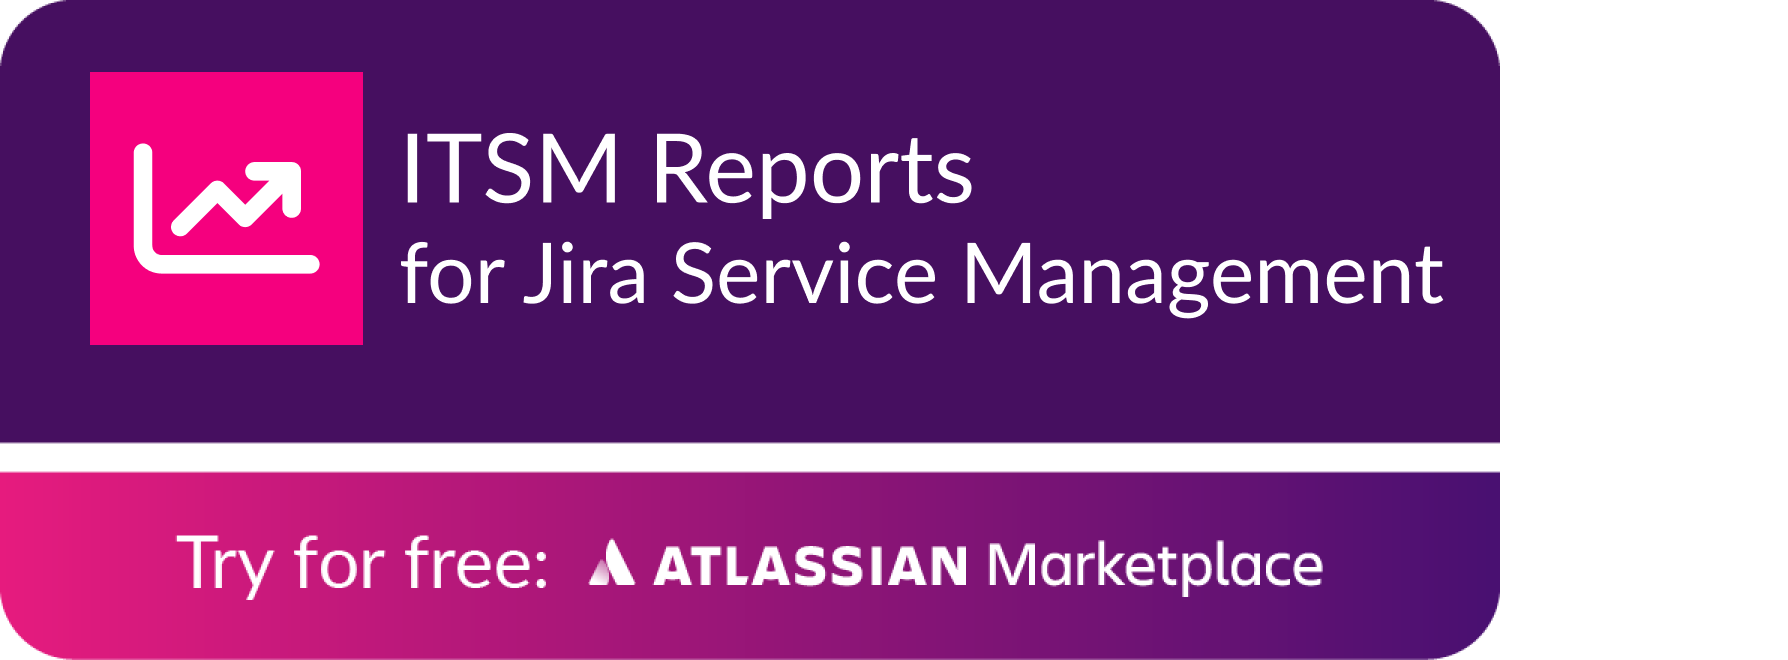 ITSM reports for Jira Service Management